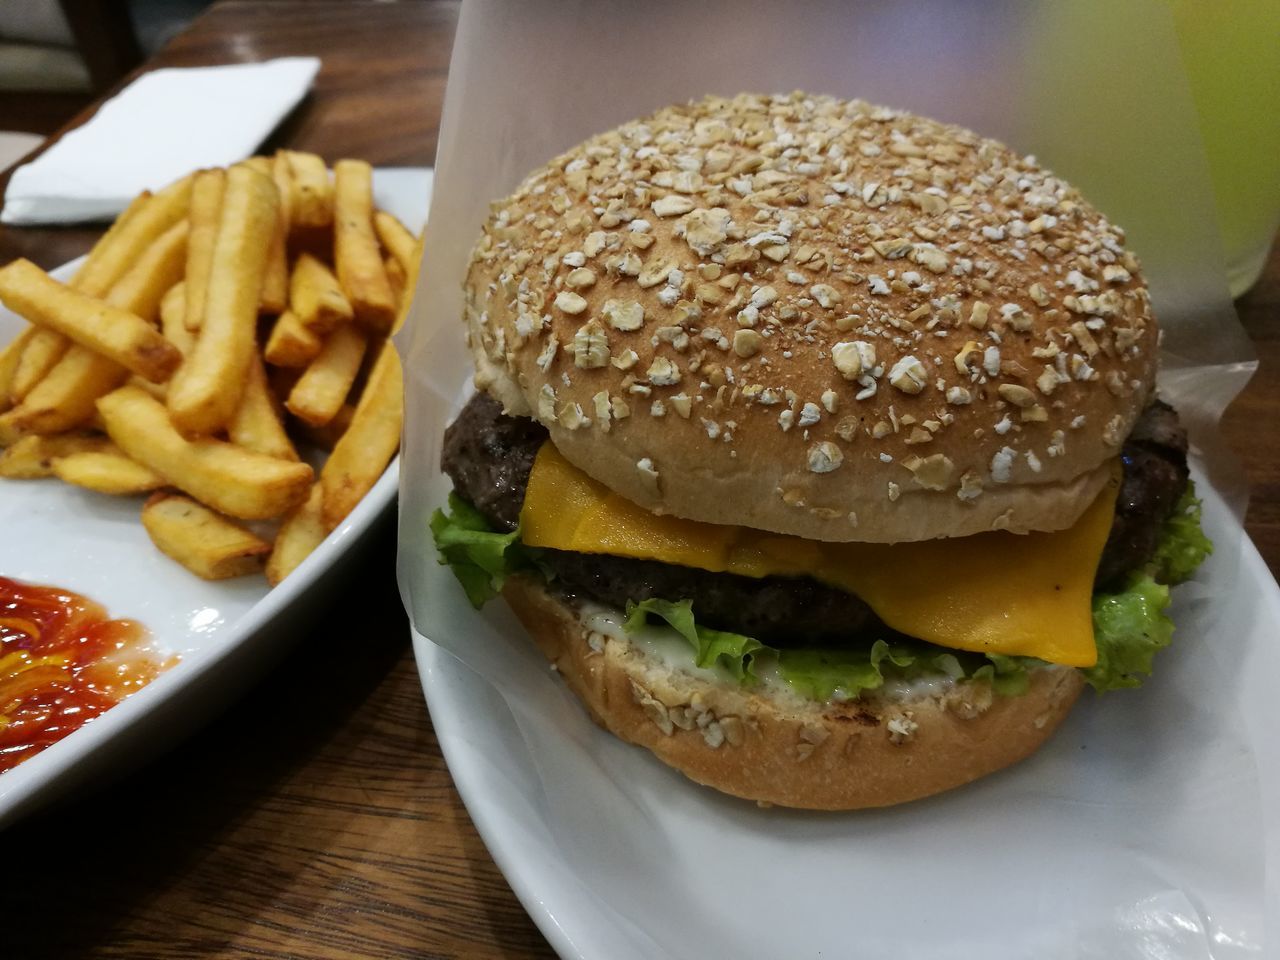 CLOSE-UP OF BURGER ON PLATE